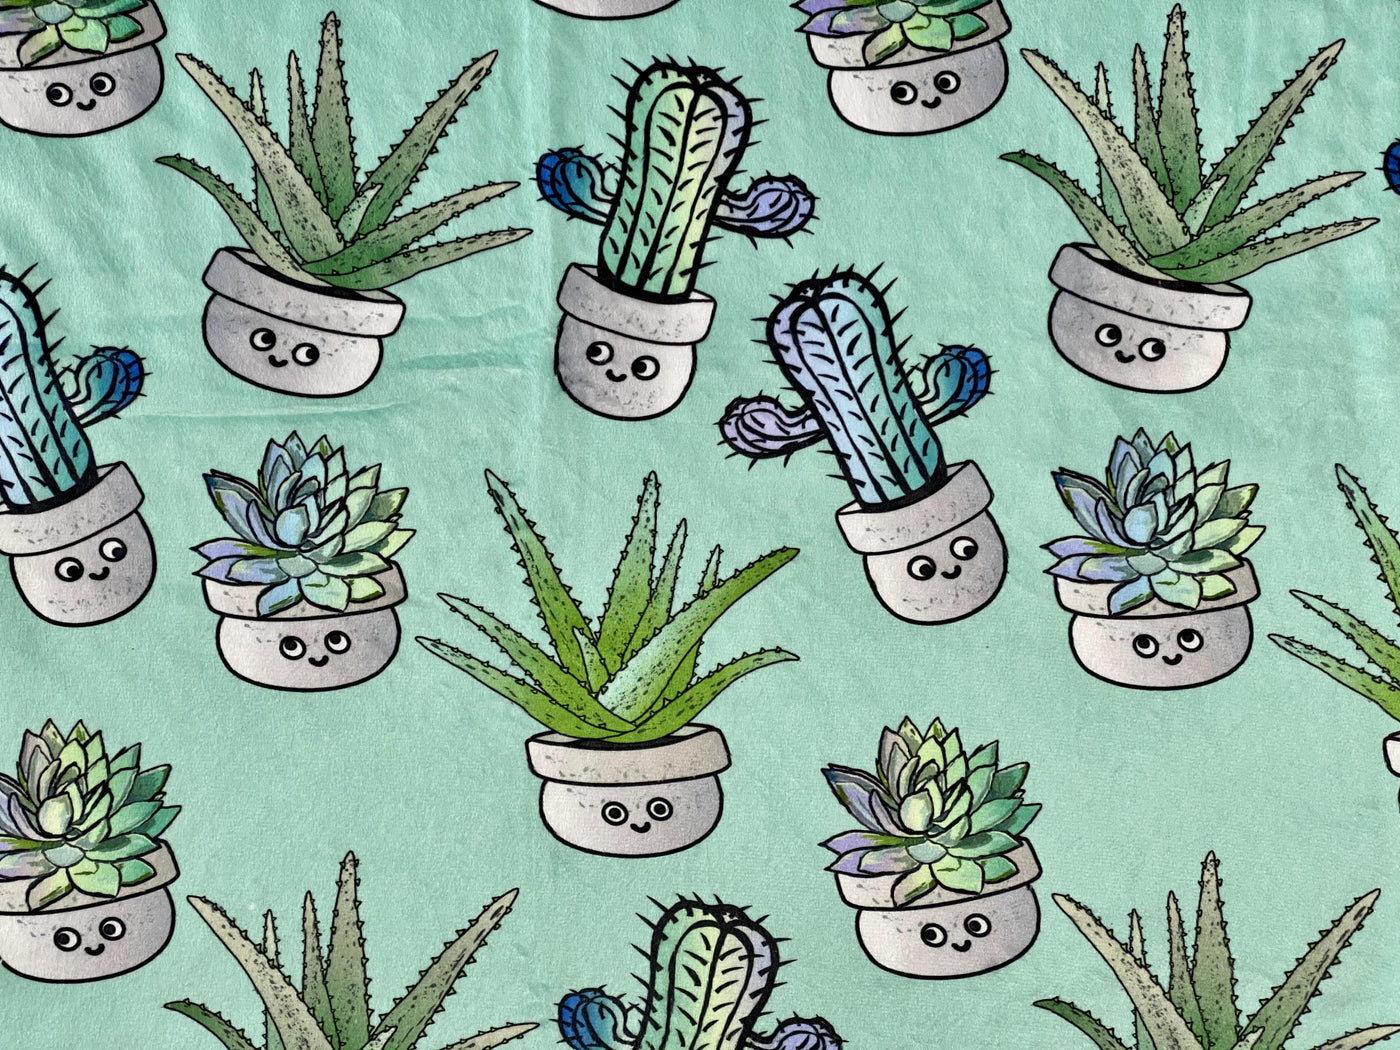 Baby blanket: Soft Cactus and Succulent plants turquoise